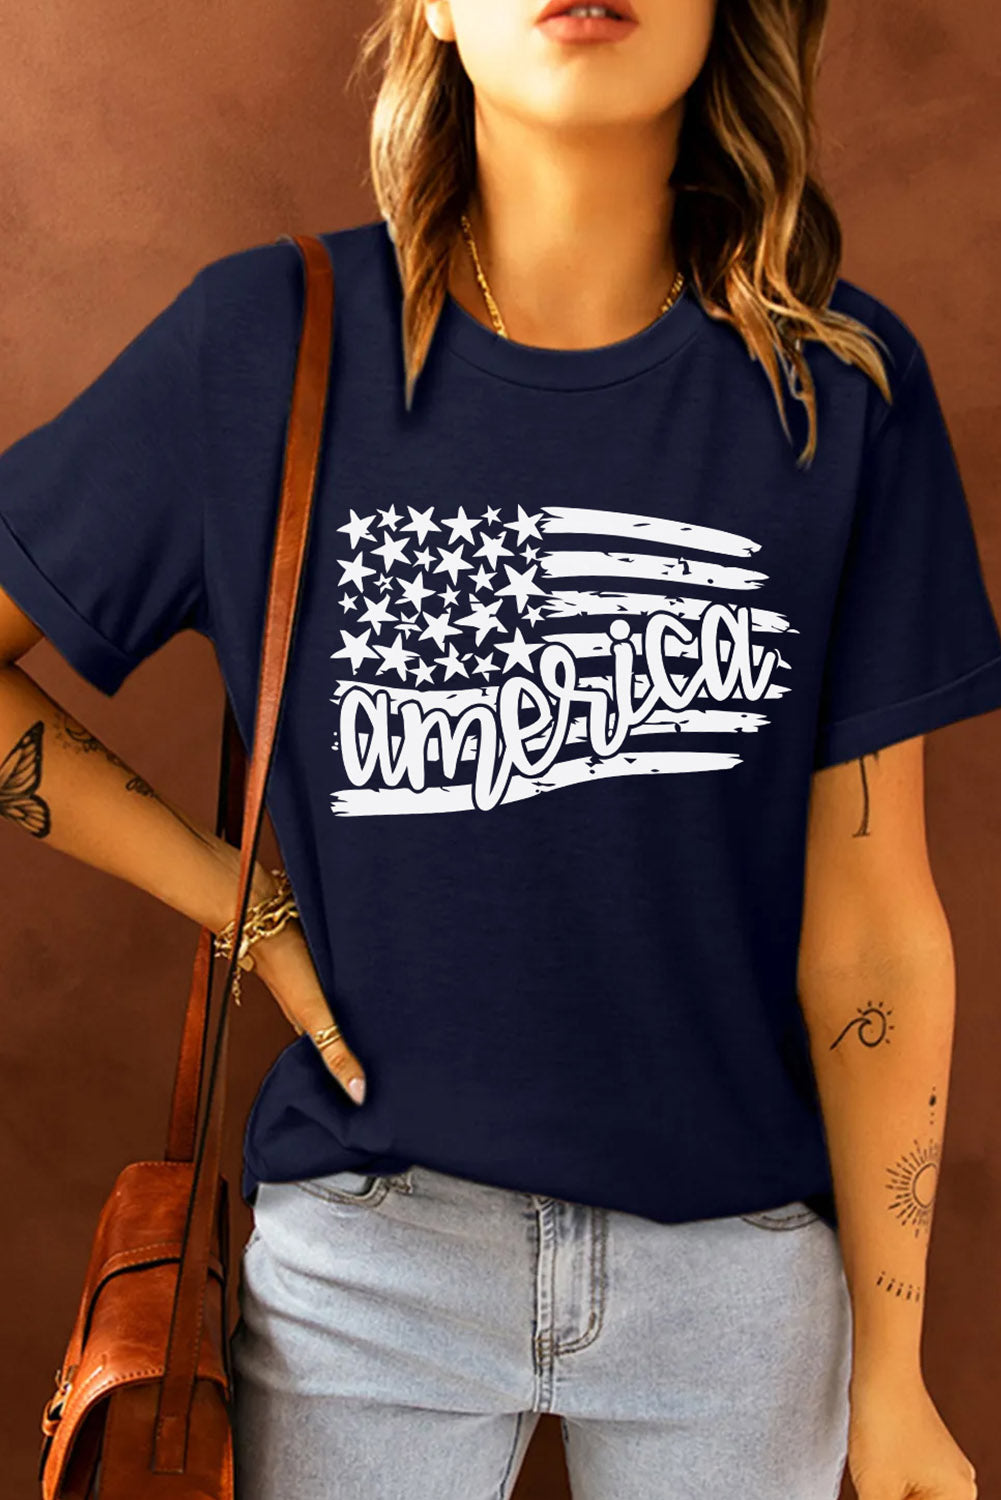 America Flag Graphic Top Classic Patriotic Cuffed Short Sleeve Womans Shirt Blue